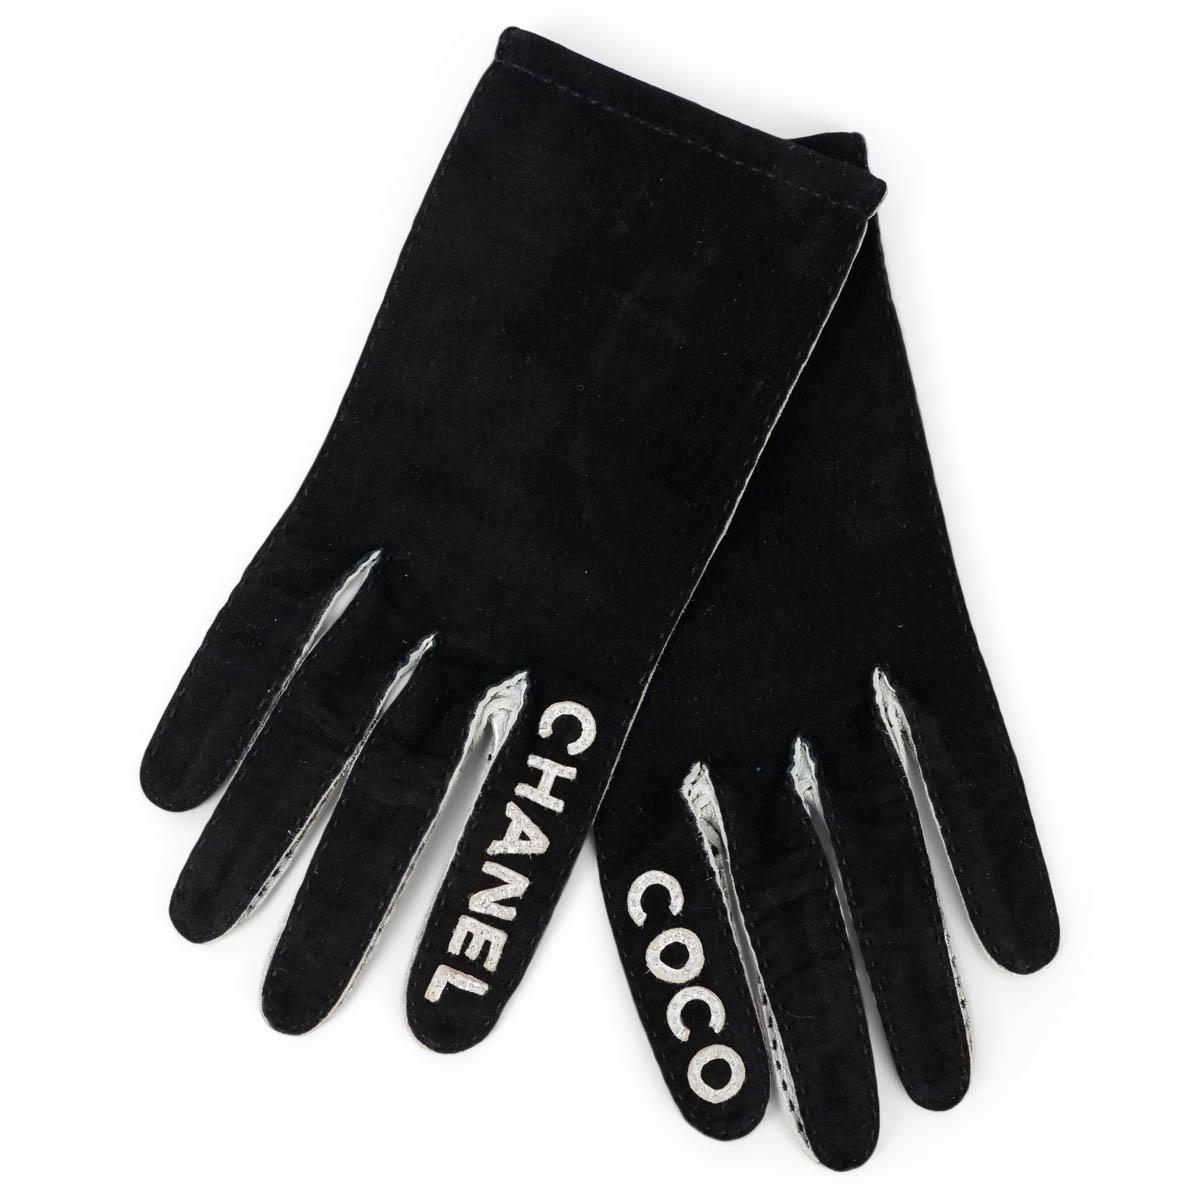 CHANEL black suede & silver leather LOGO Gloves 7